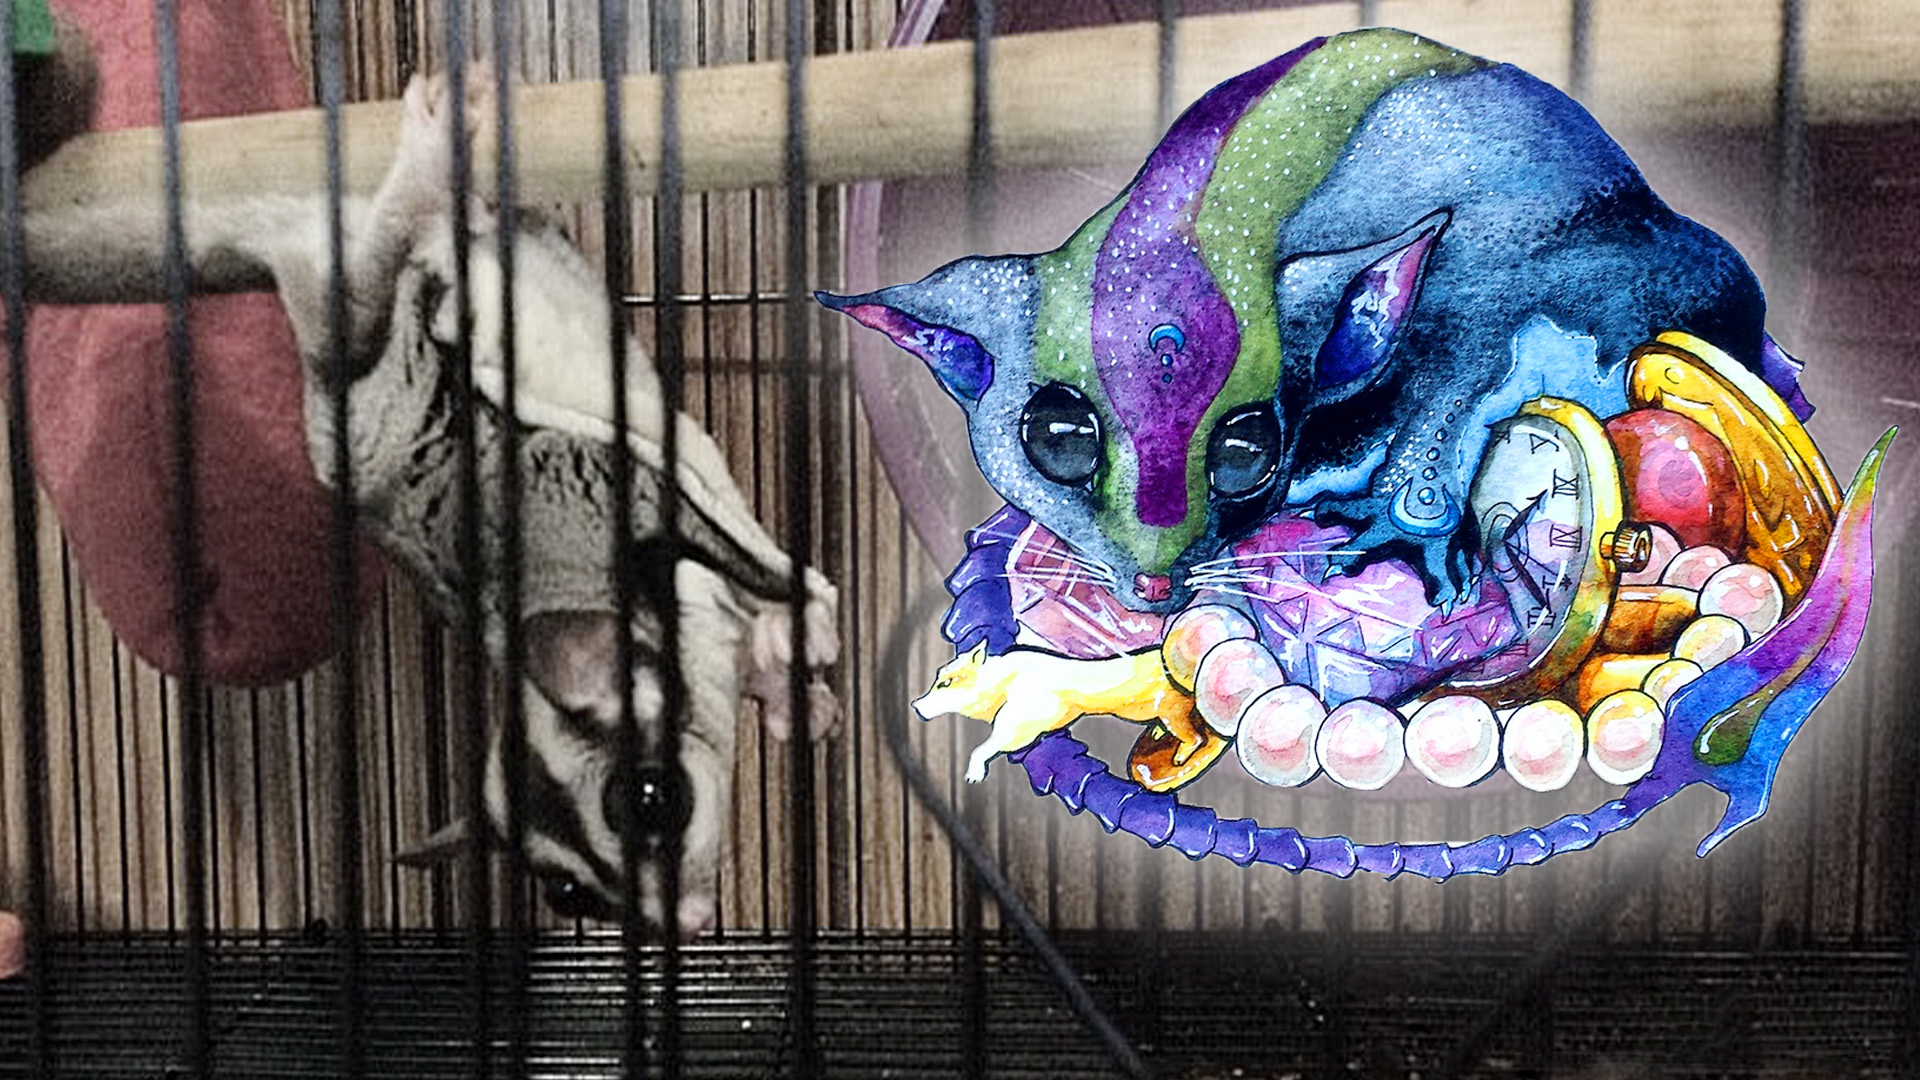 Tink, a female sugar glider hanging from one of her bars upside down in her cage, next to a illustration inspired by her of a Pathfinder monster, which resembles a blue and purple glider.